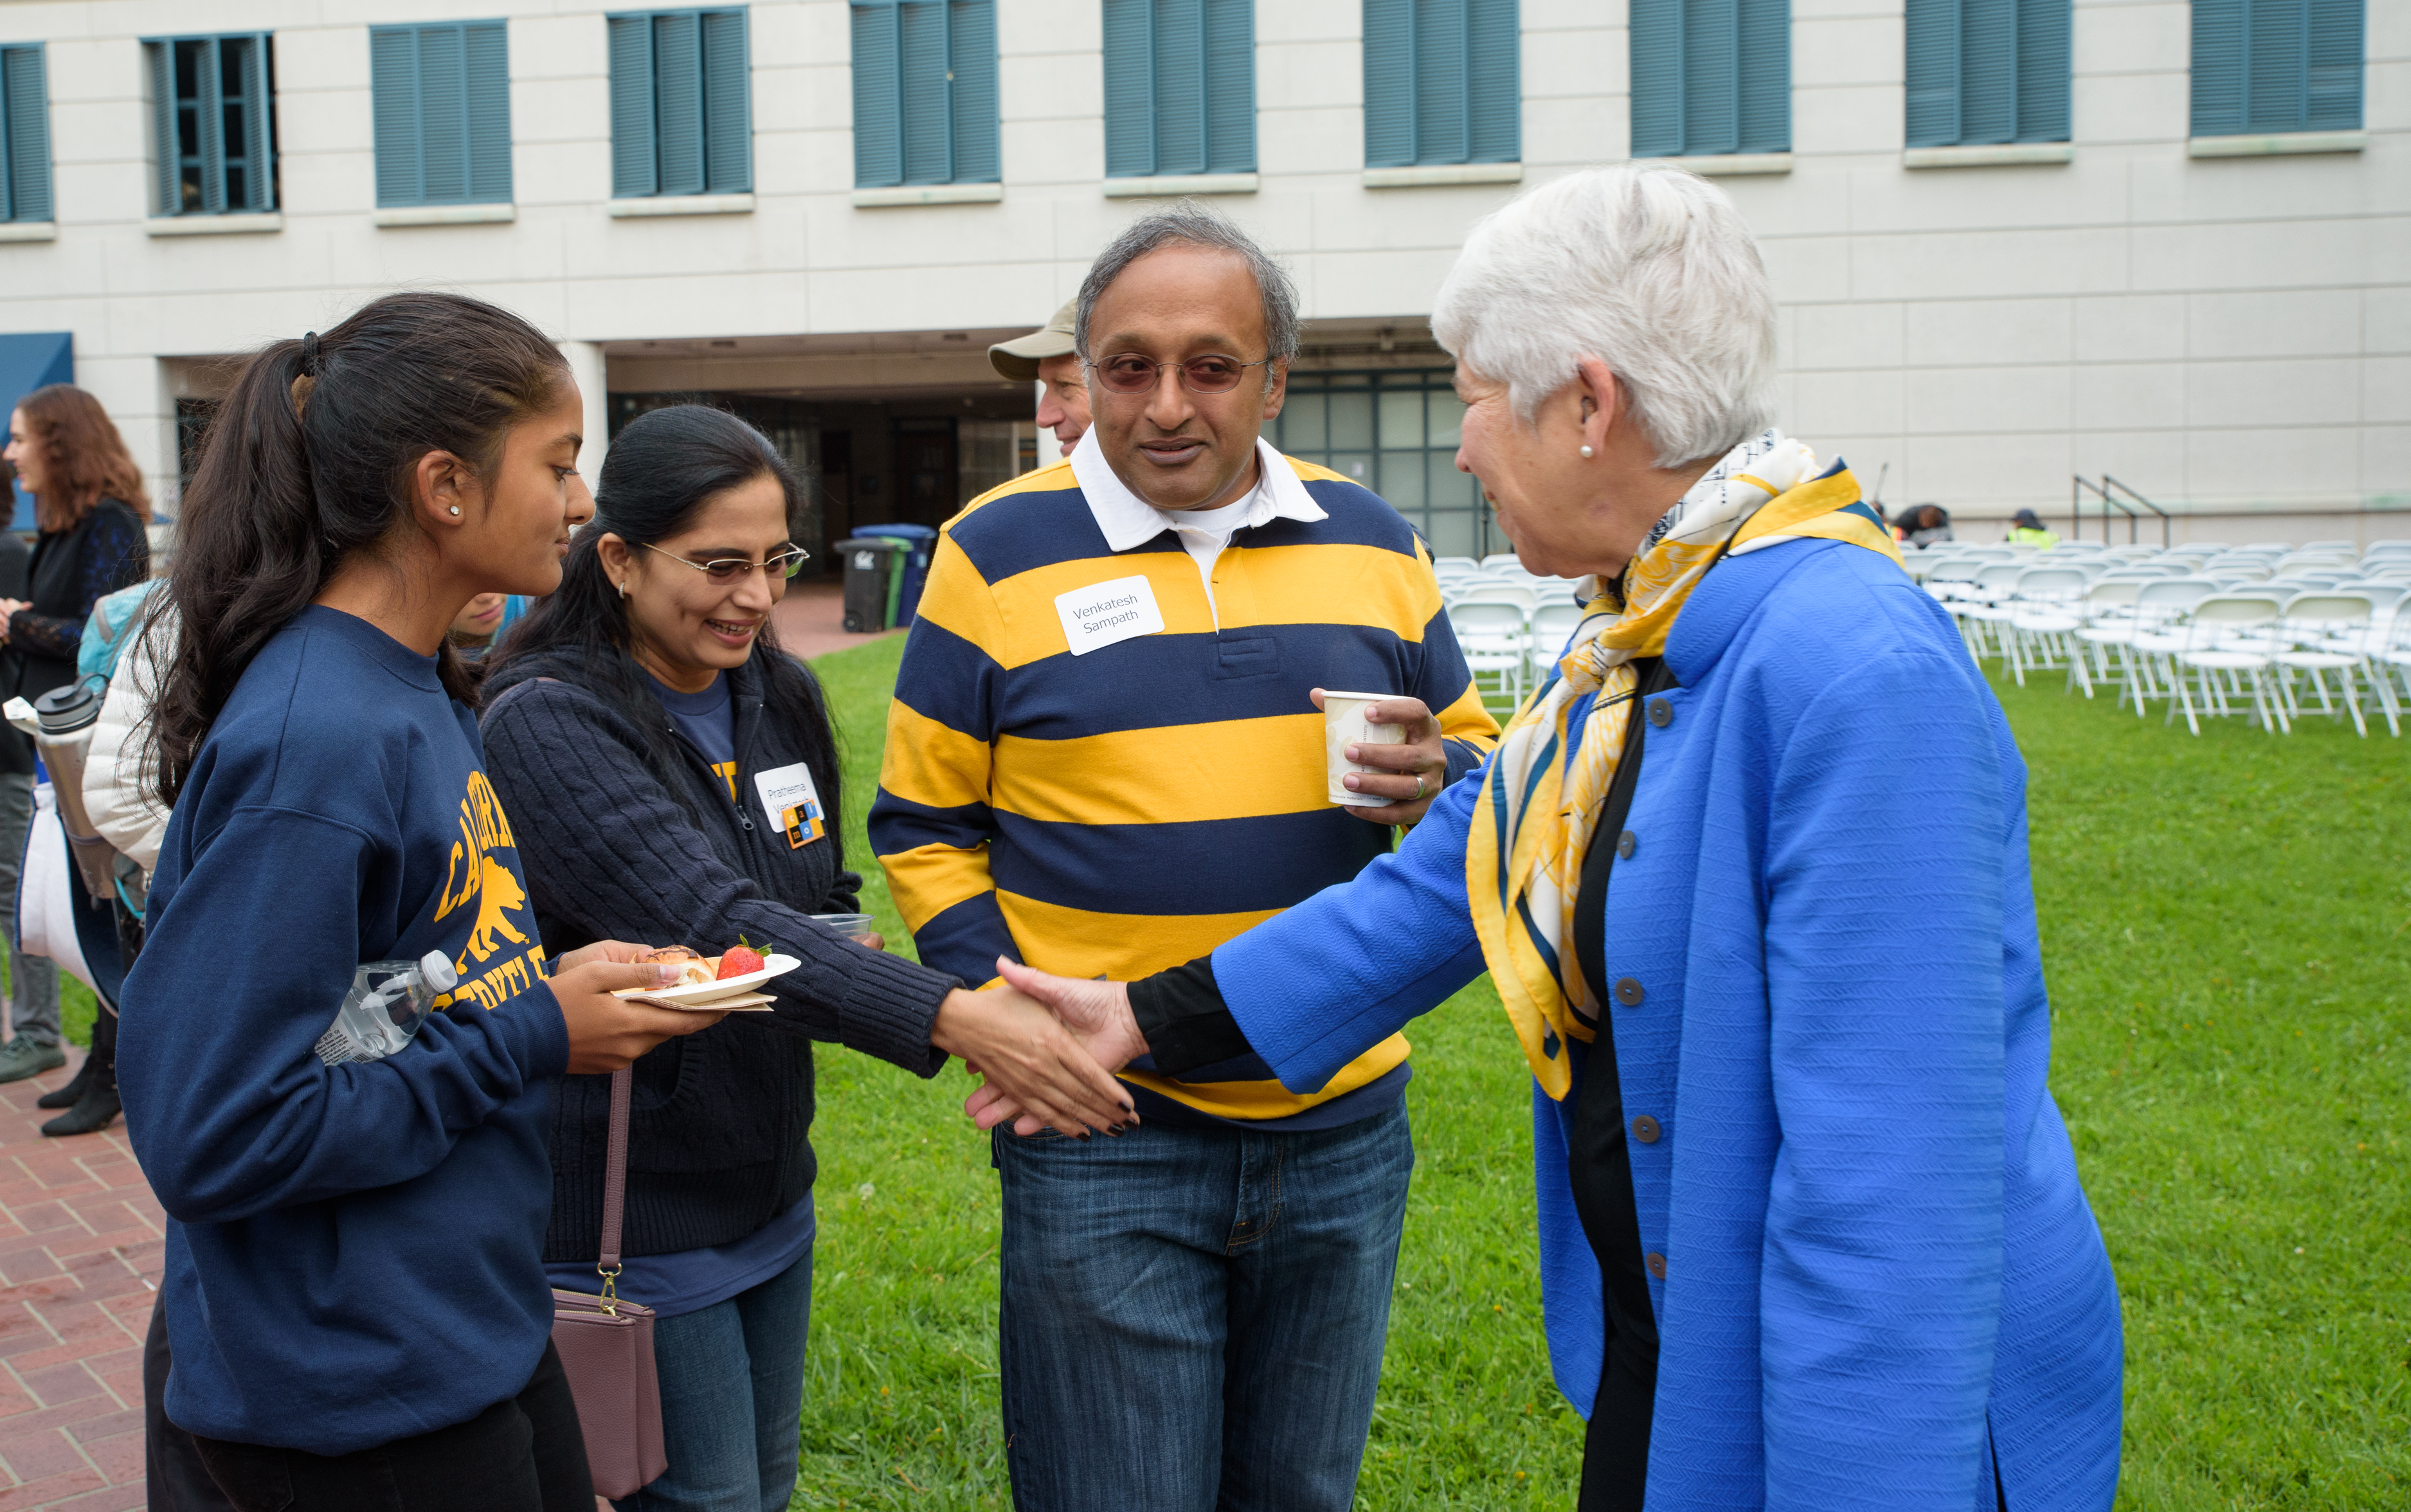 Chancellor Carol Christ shaking hands with student and parents at homecoming